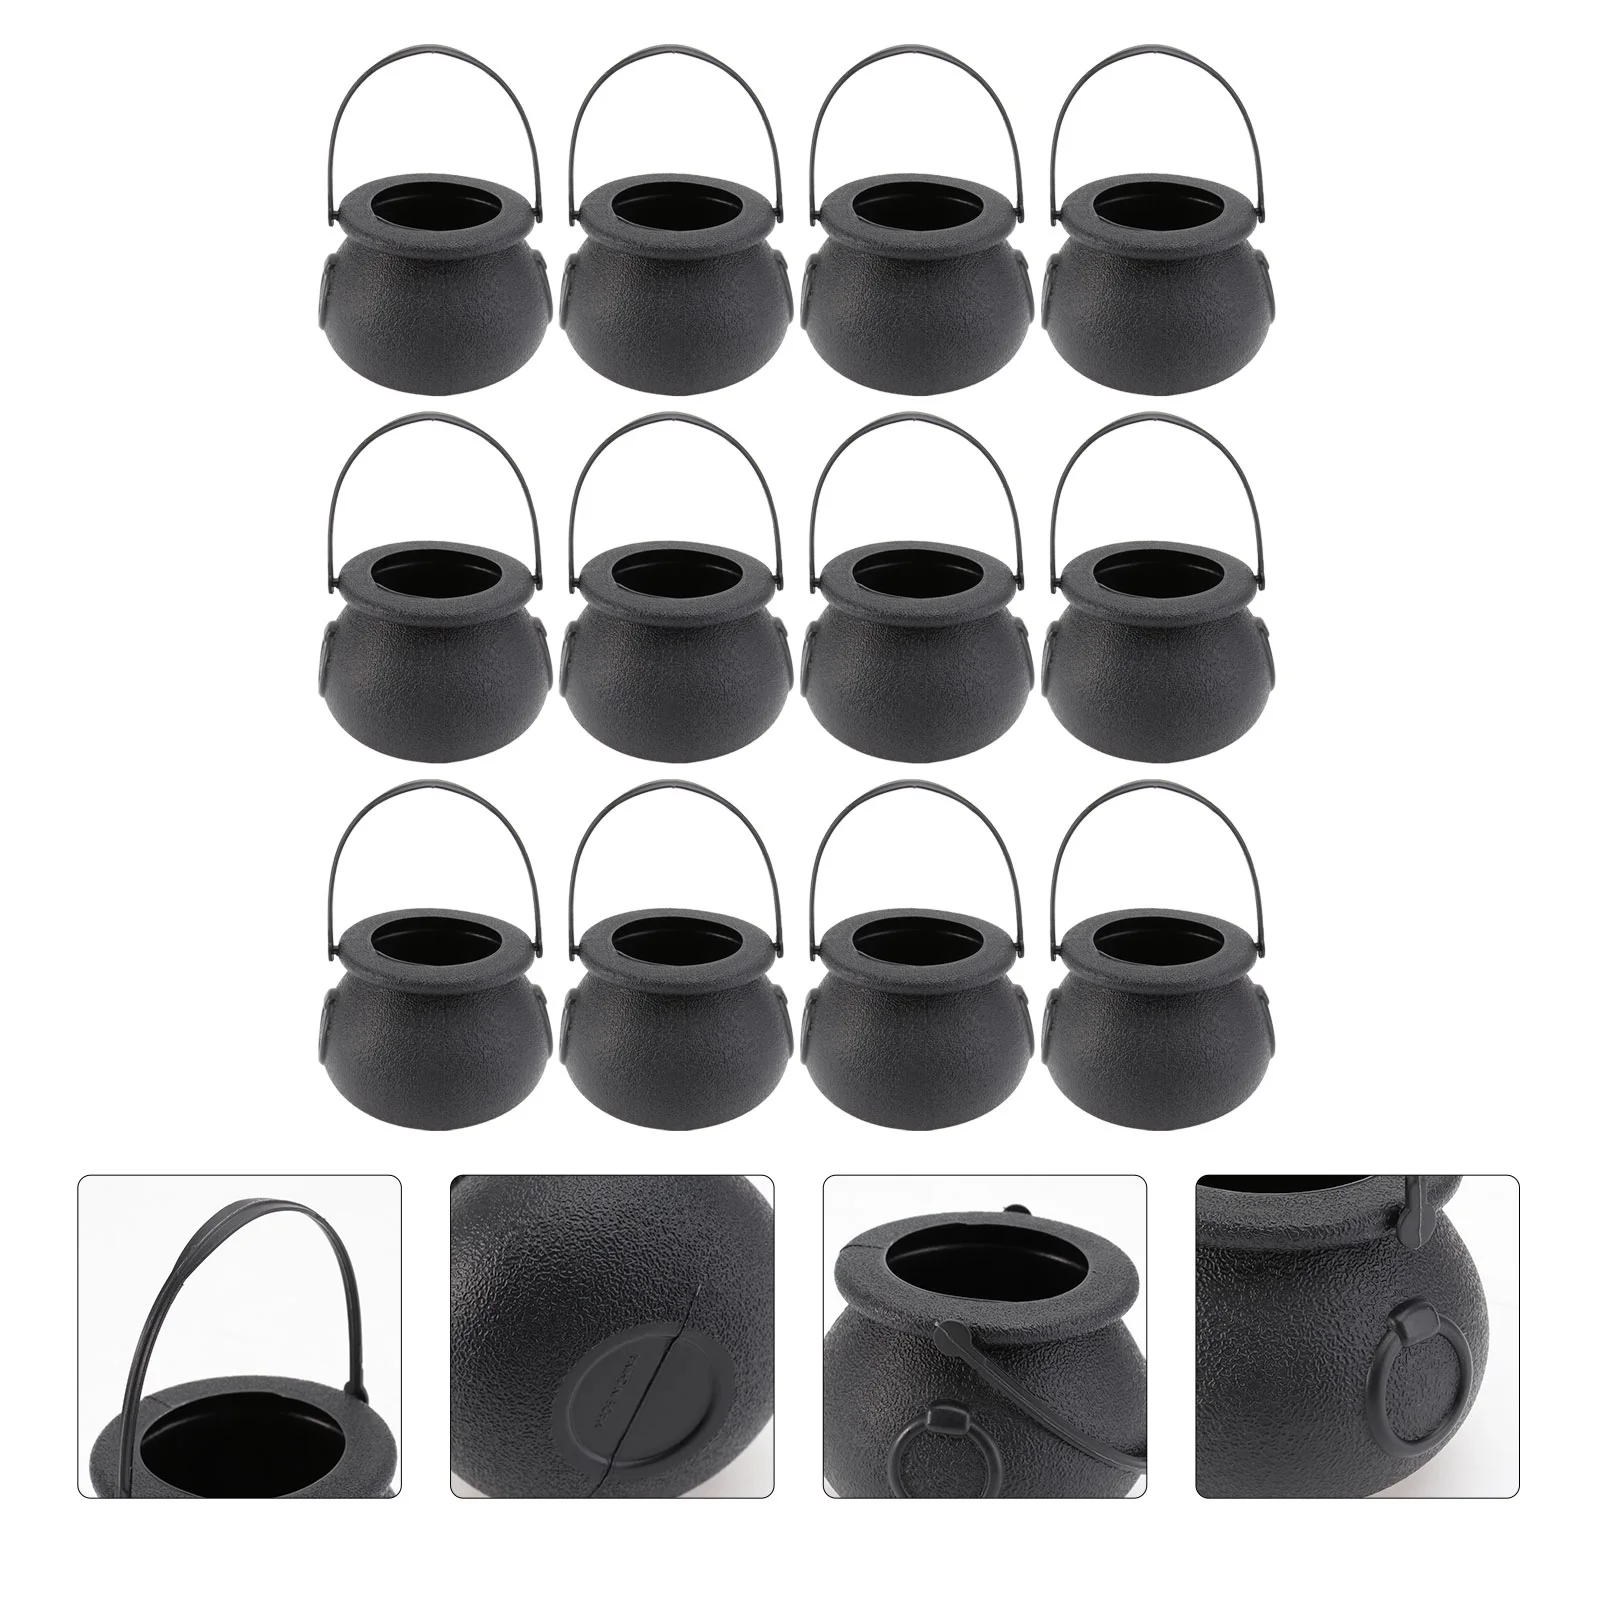 

12Pcs Black Cauldron Kettle Candy Bucket Trick- or- Treat Candy Pail Holder Candy Bowl Party Favor Supplies